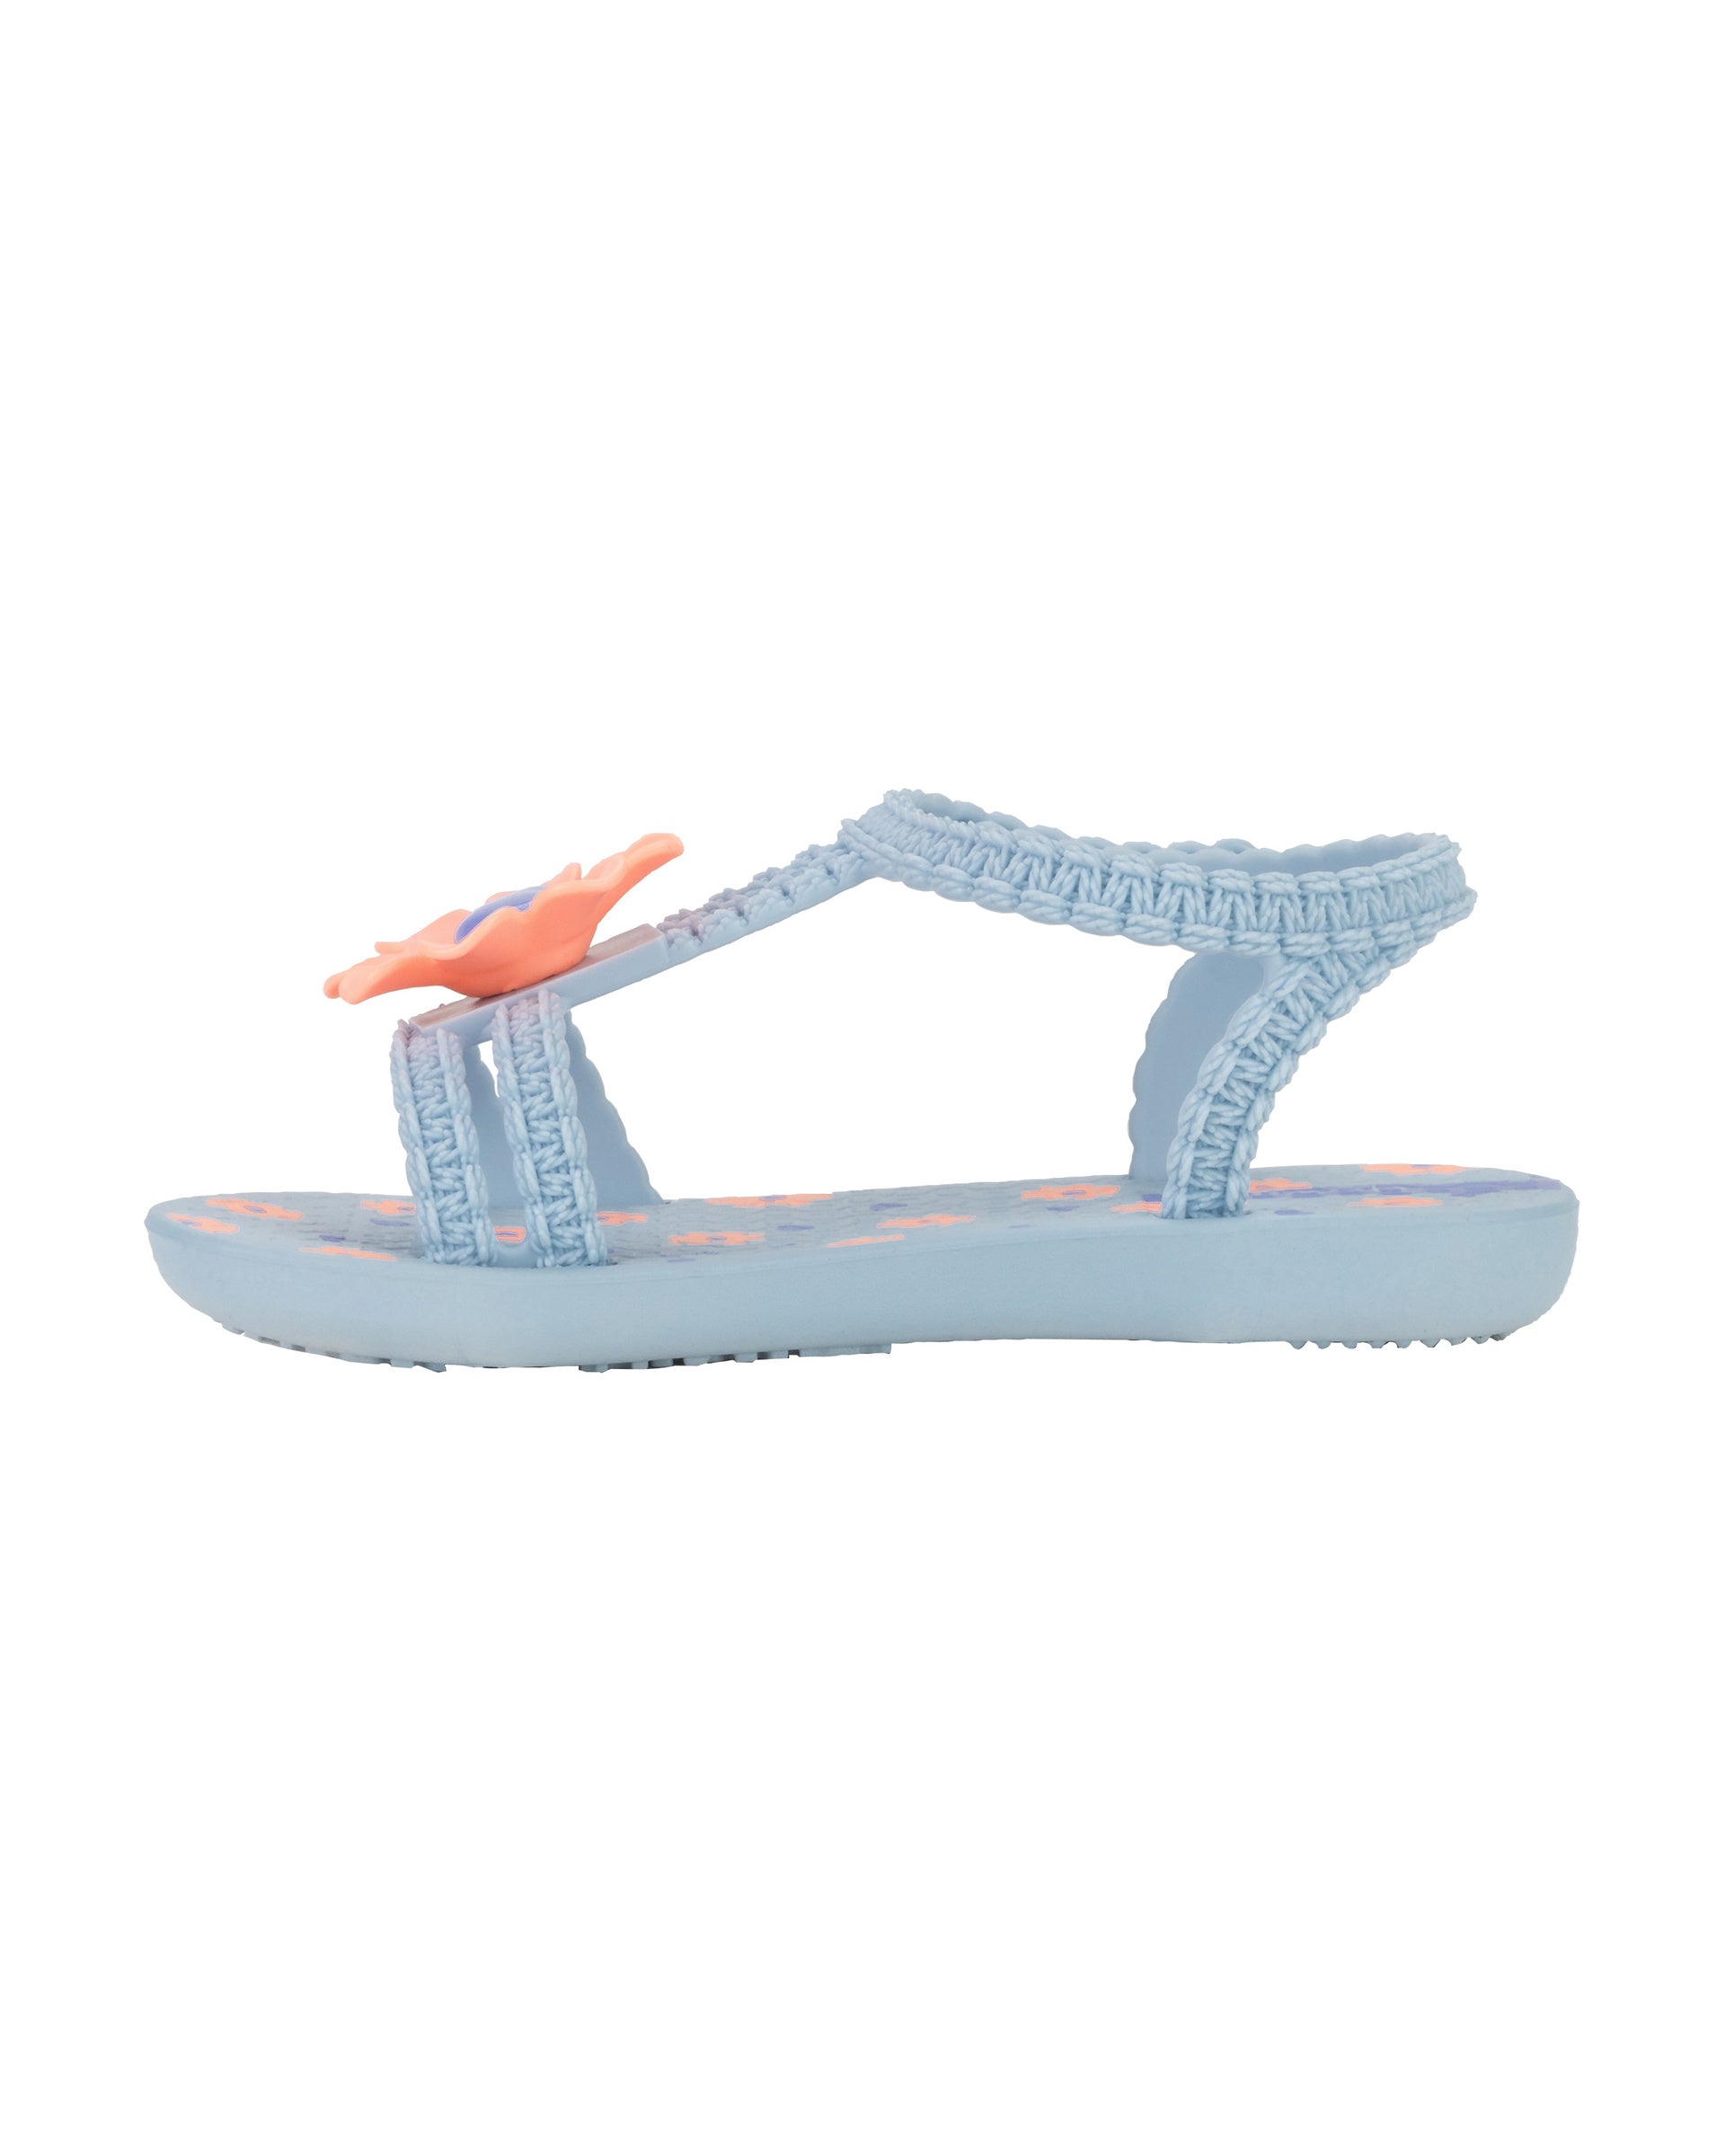 Inner side view of a blue Ipanema Daisy baby sandal with pink flower on top and crochet texture .